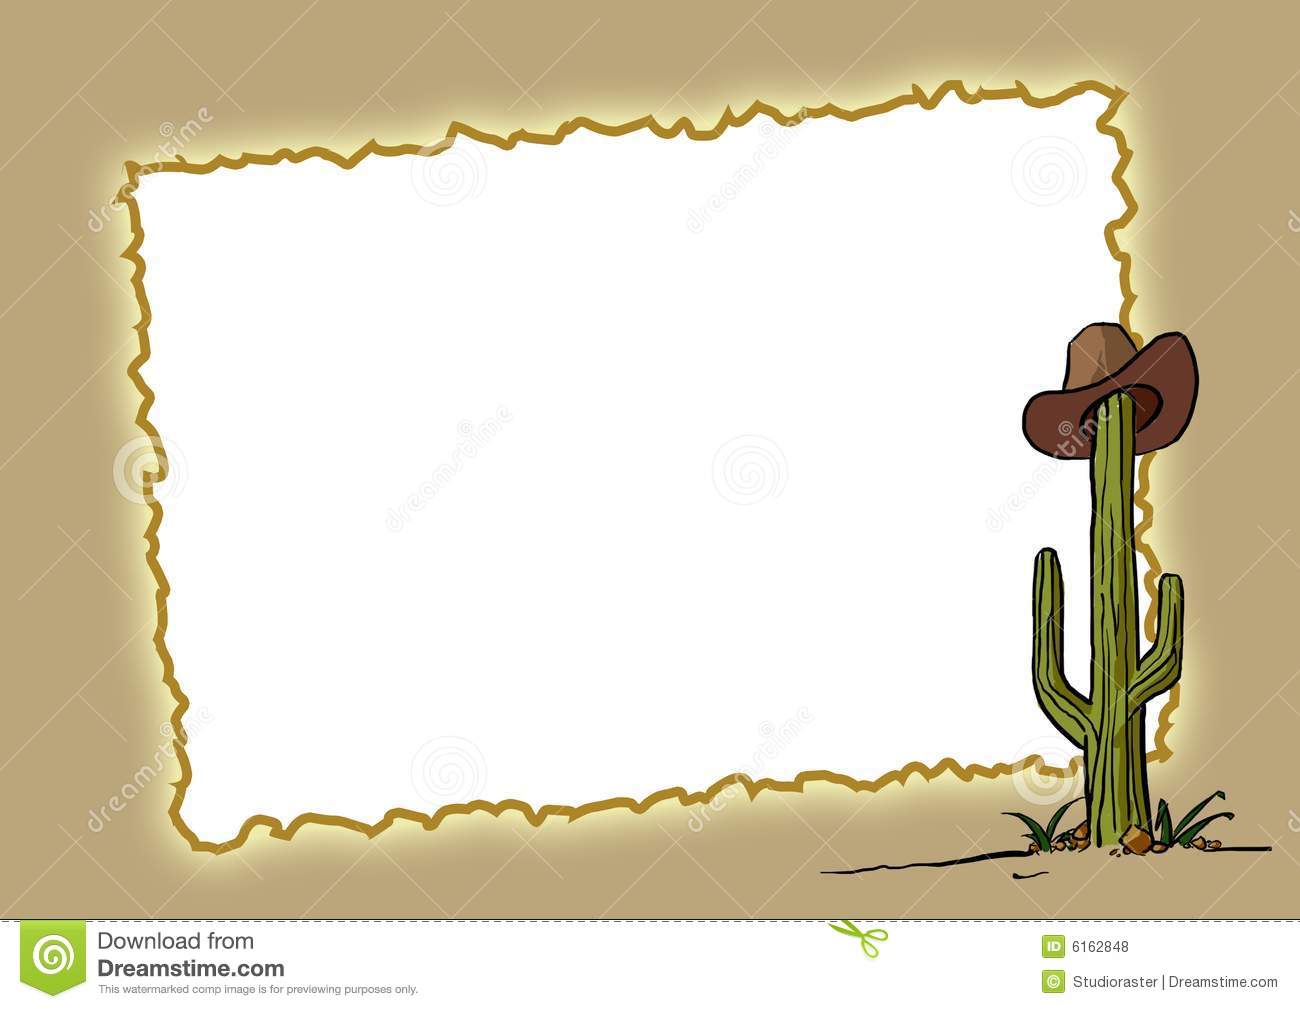 Old West Card 07 Royalty Free Stock Photos   Image  6162848